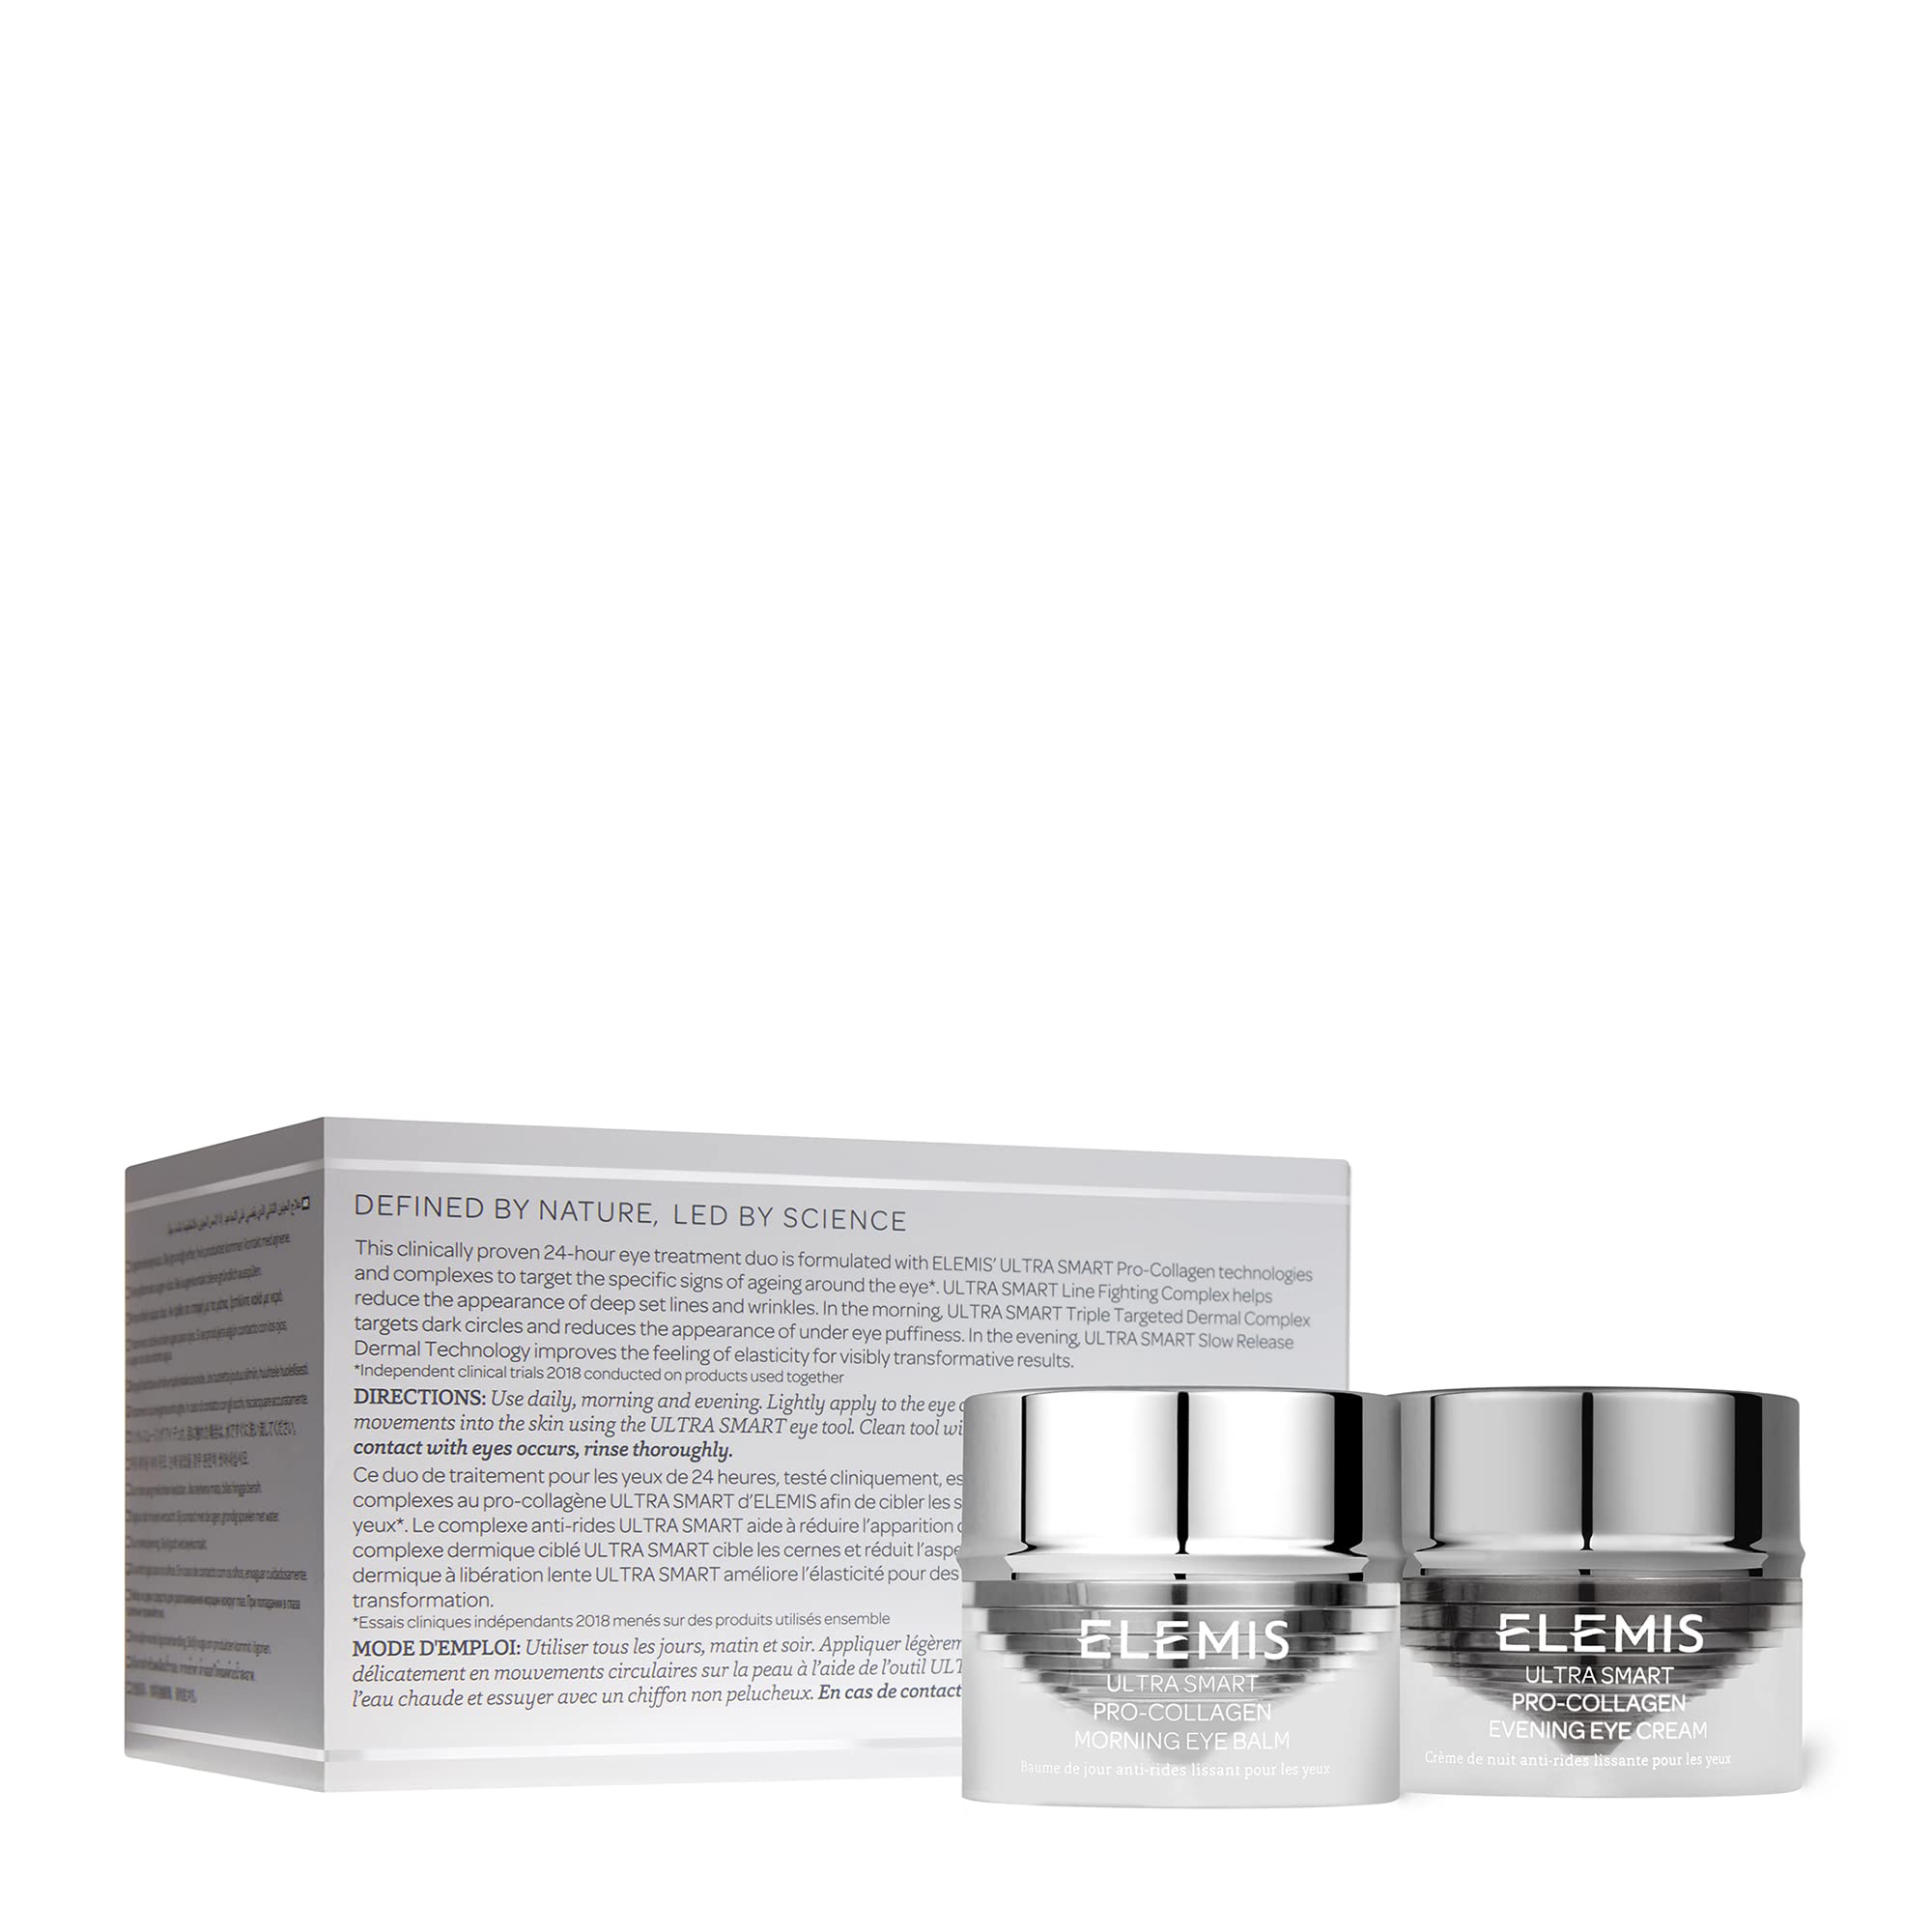 ELEMIS ULTRA SMART Pro-Collagen Eye Treatment Duo | Day & Night Treament System and Tool Rejuvenates, Smoothes, and Tightens the Eye Contour | 10 mL,0.33 Ounce (Pack of 2)